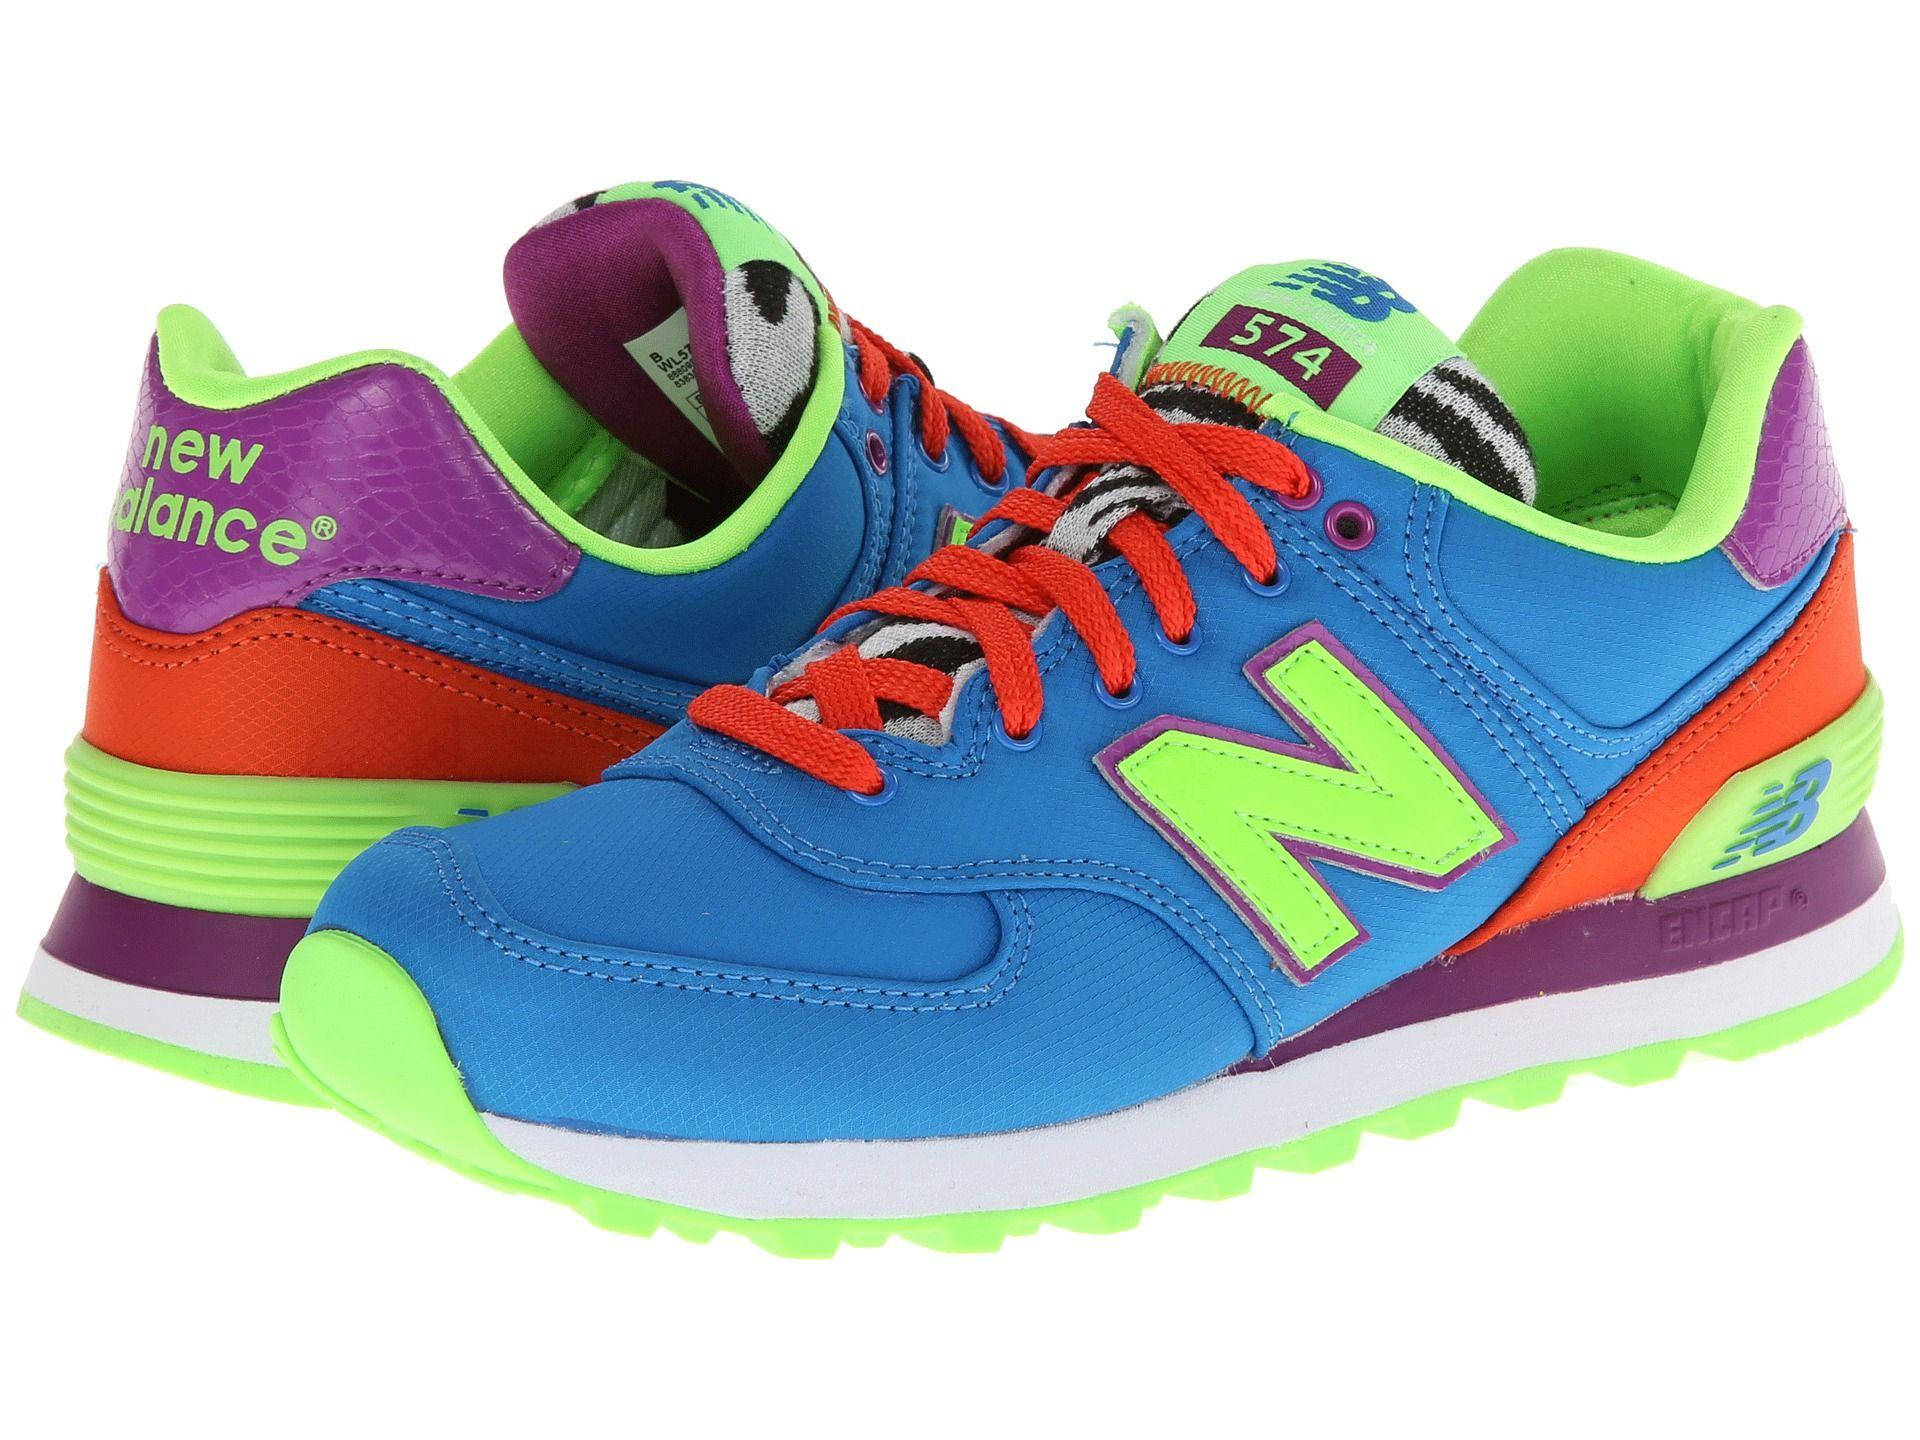 New Balance Neon Coloured Shoes Wallpaper